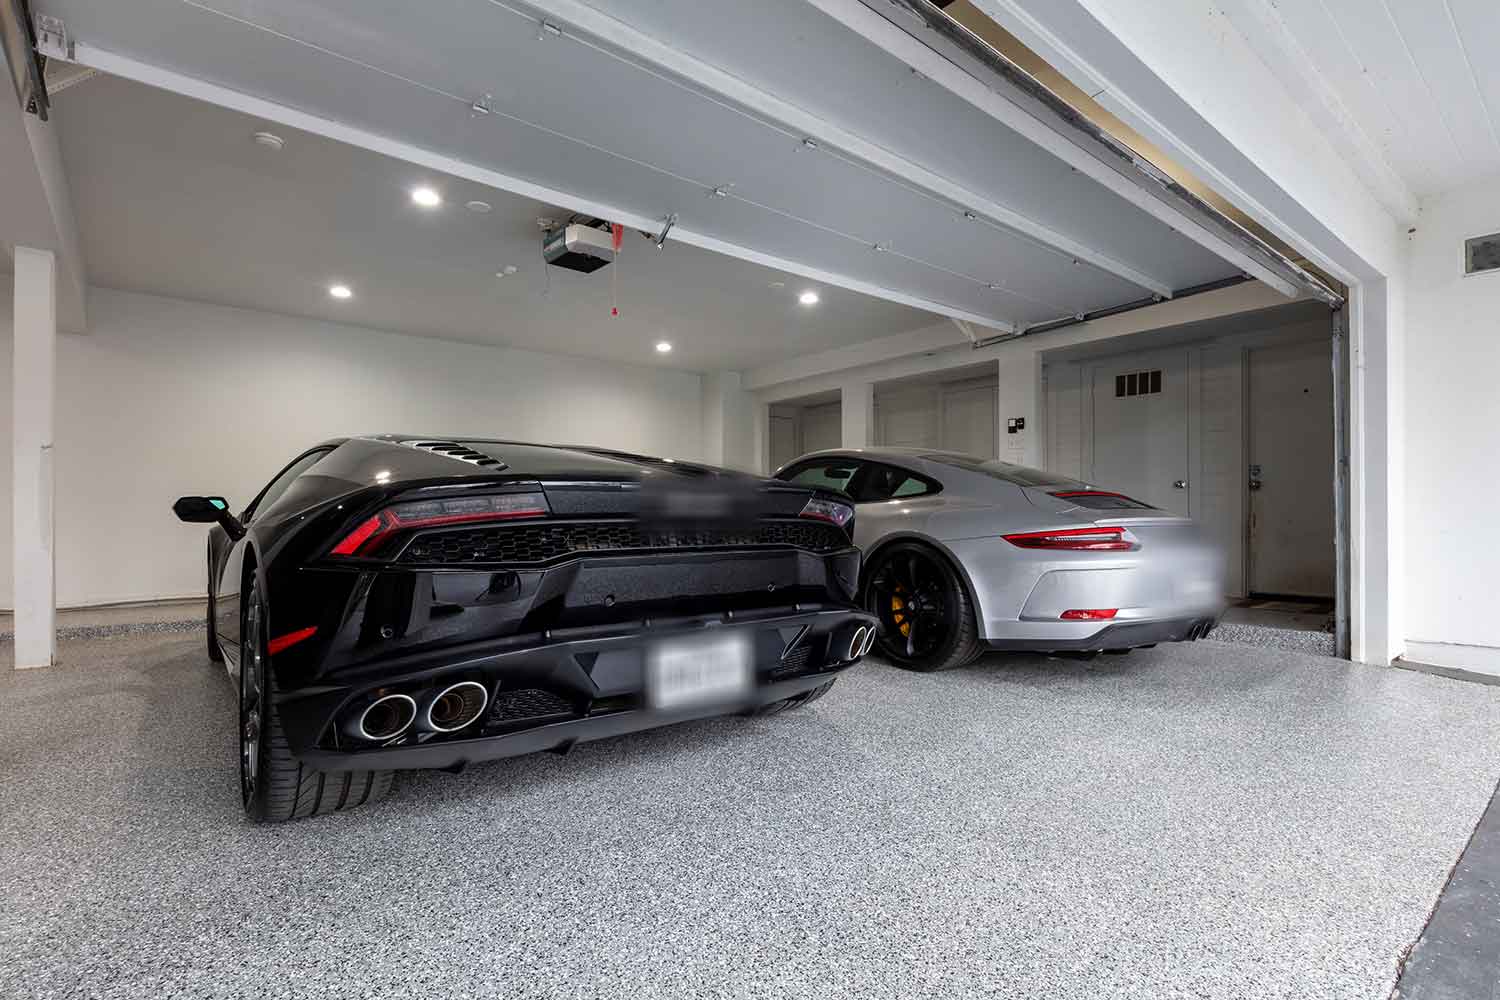 Some seriously cool cars on a luxury epoxy garage floor finish. This Highland Park, Texas installation used exclusively Westcoat products—the industry leader in these systems. This installation will hold up for decades.